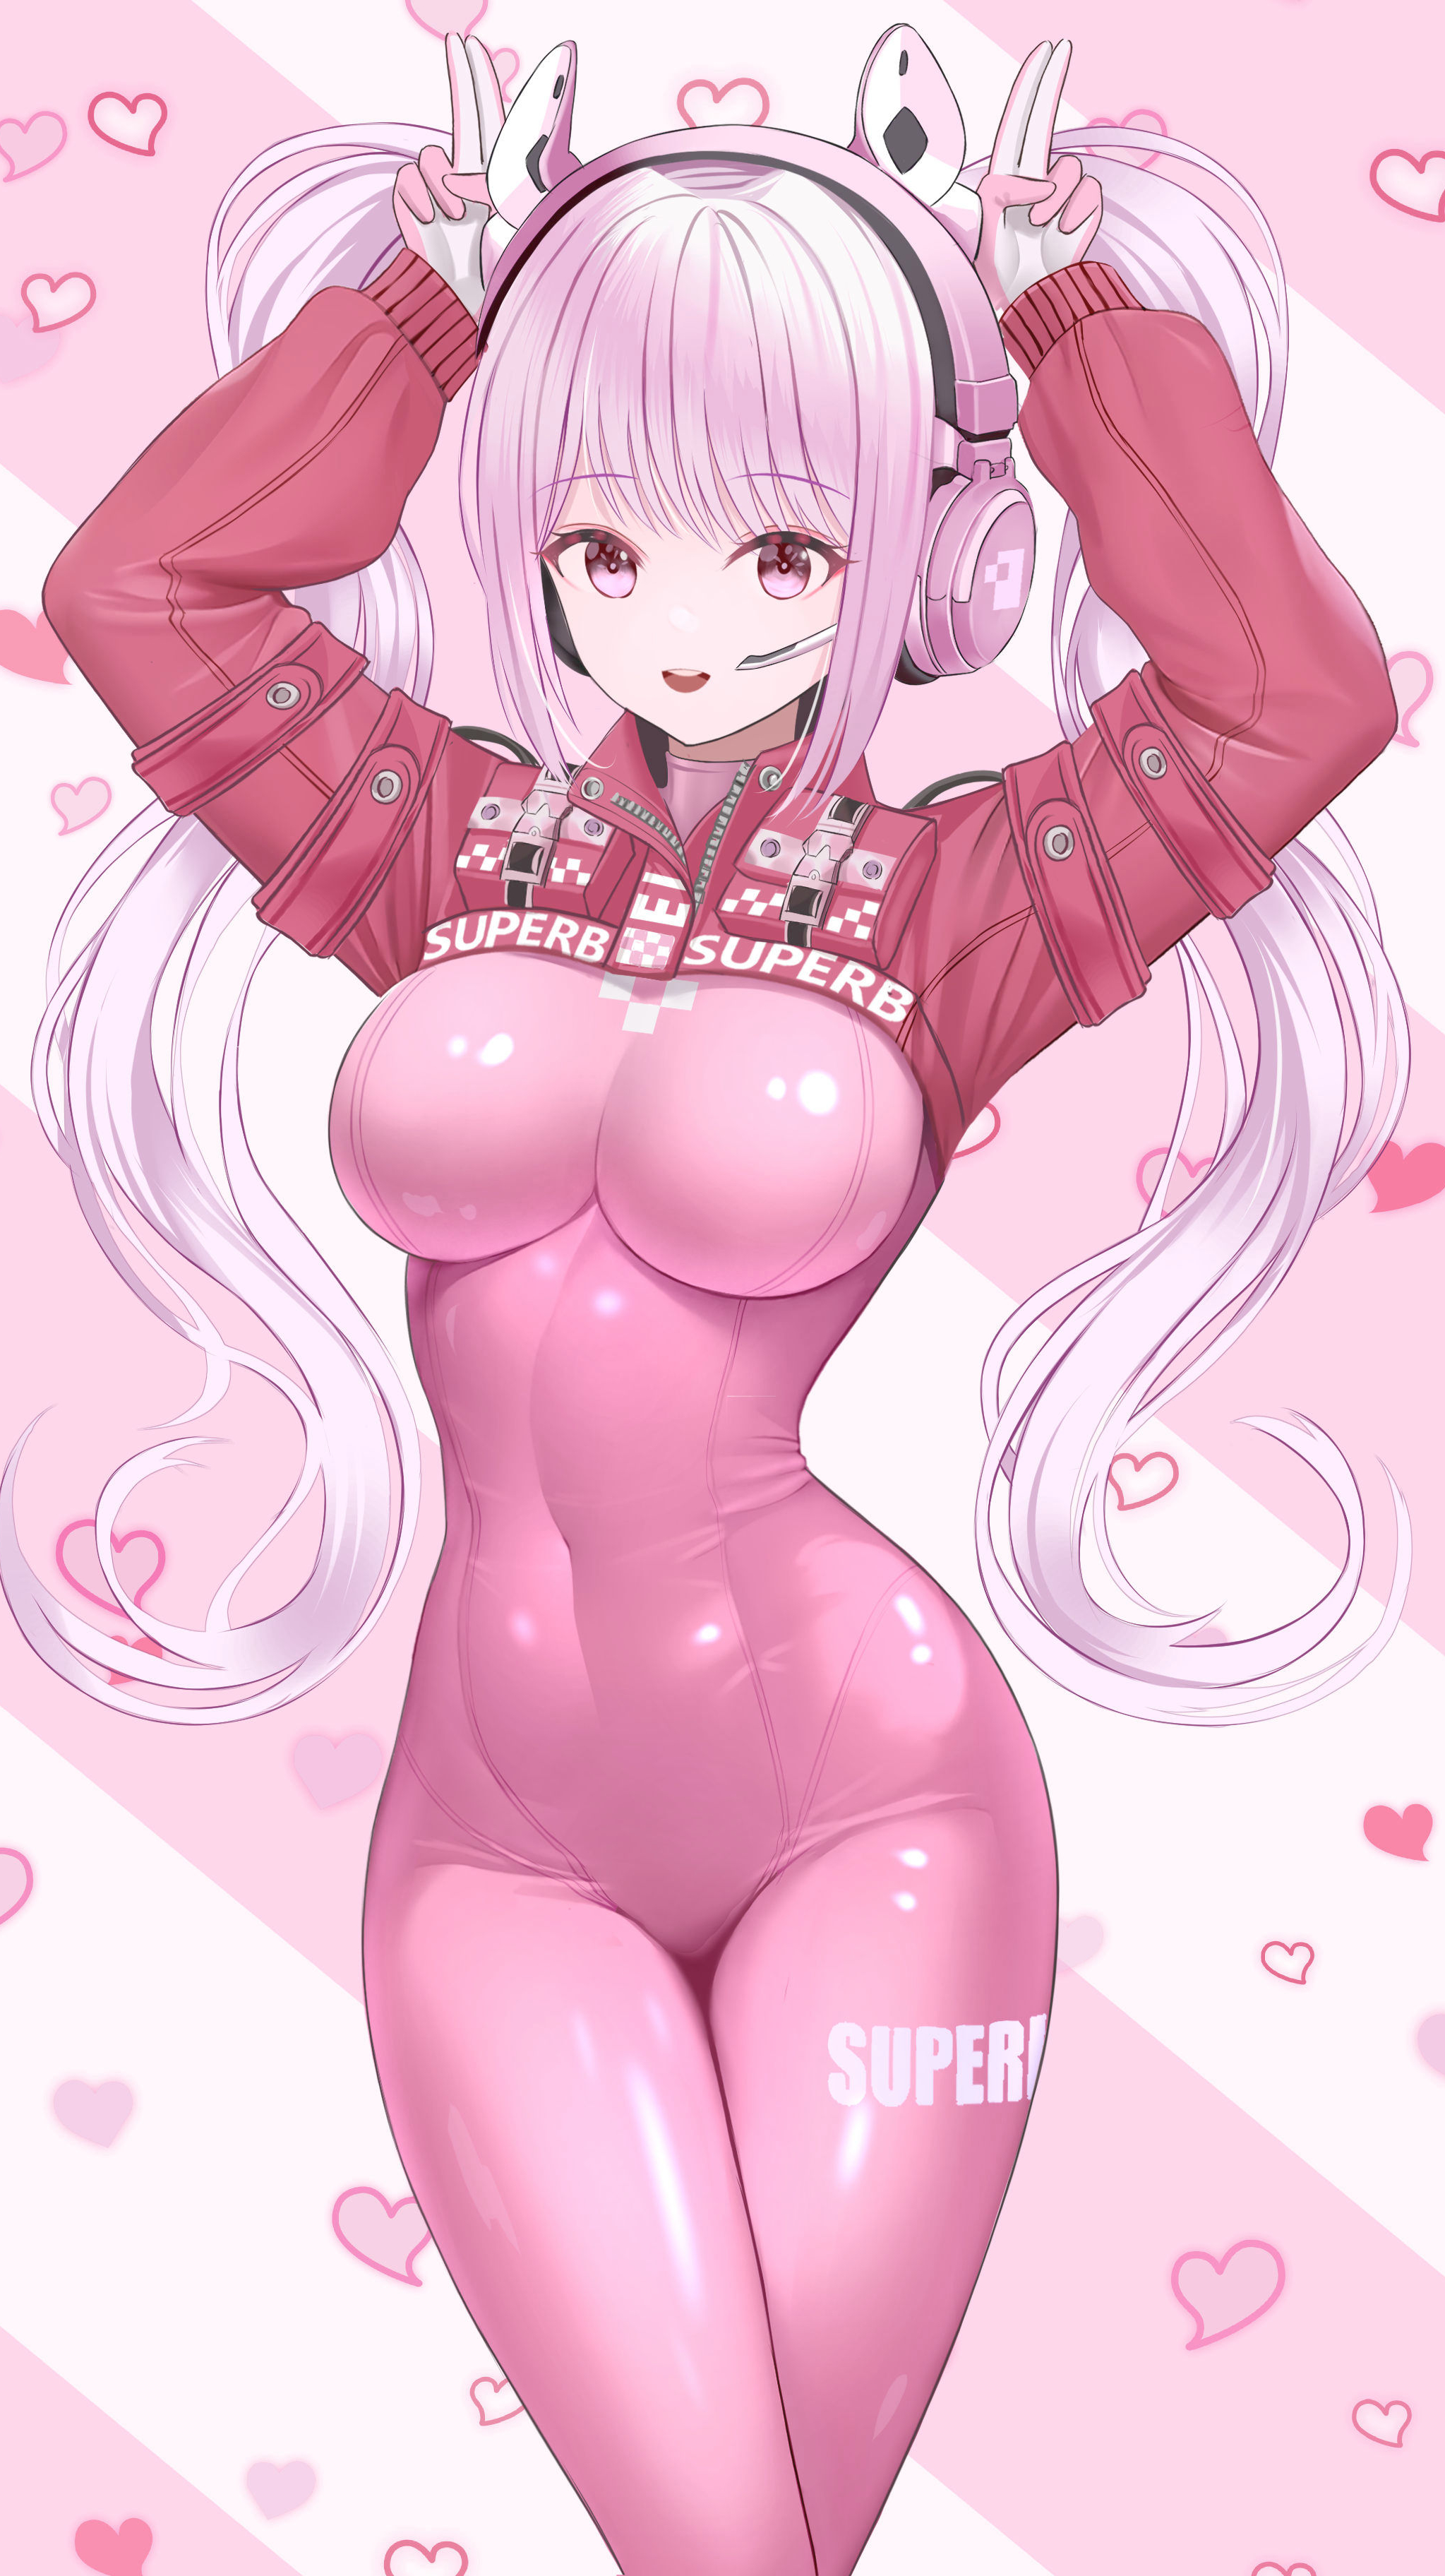 Anime 2047x3648 anime anime girls Nikke: The Goddess of Victory Alice (Nikke) bodysuit boob pockets arms up hand gesture open mouth pink clothing twintails silver hair long hair headphones pink eyes heart (design) belly looking at viewer hips big boobs pink hair plugsuit boobs